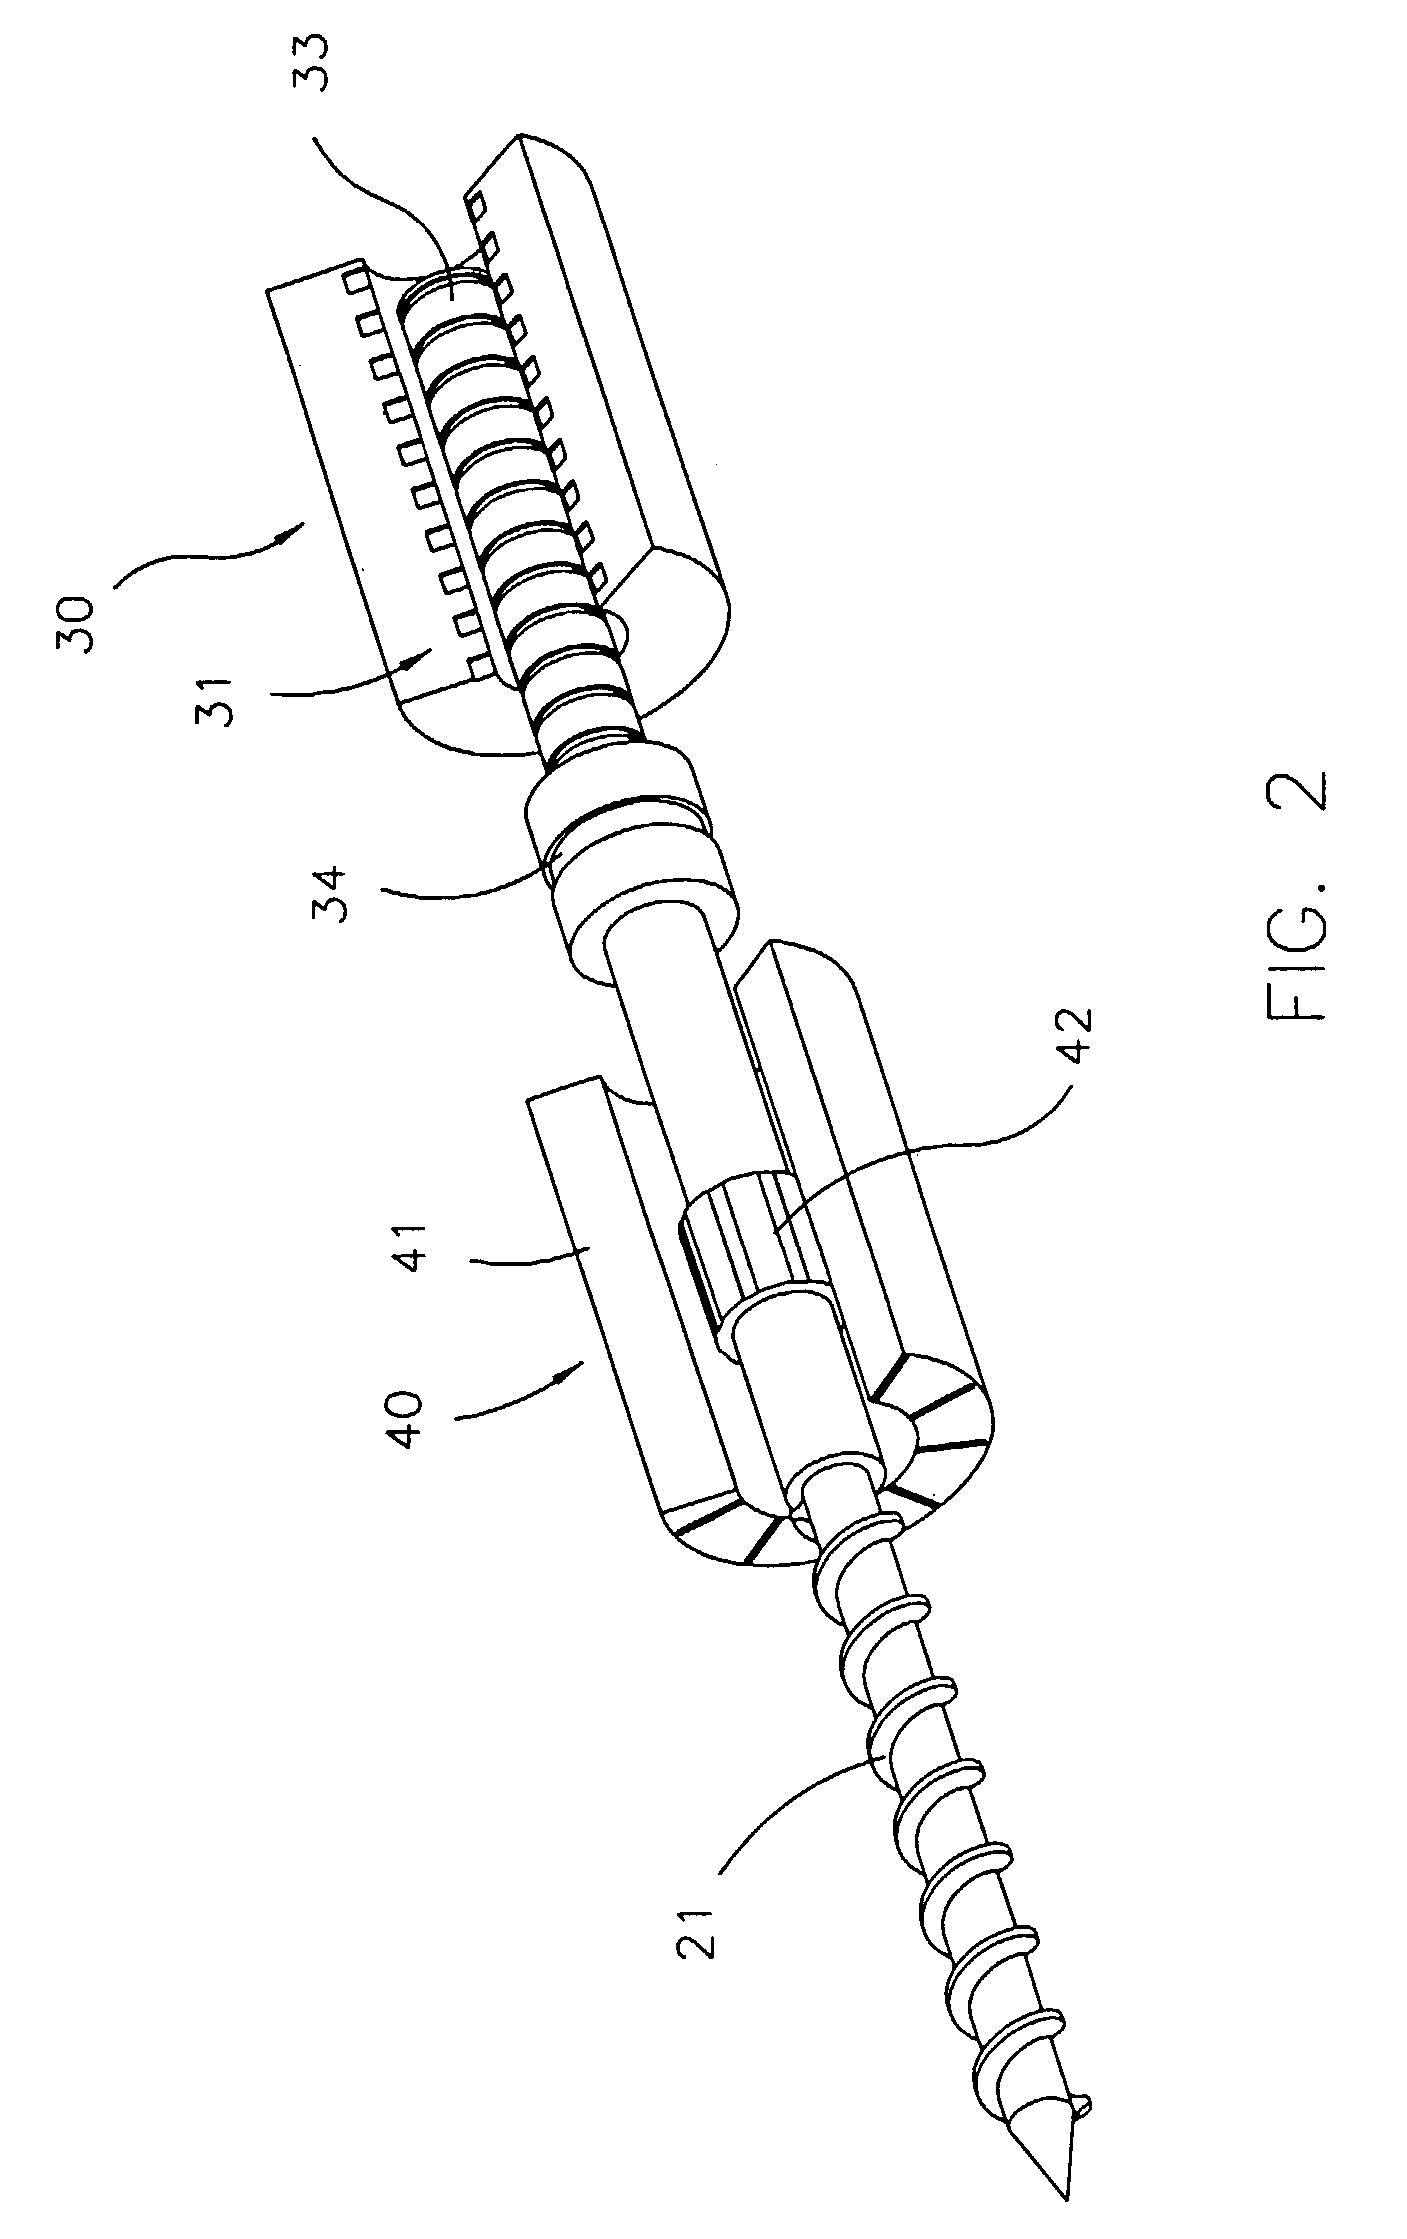 Electromagnetic coaxial driving injection apparatus